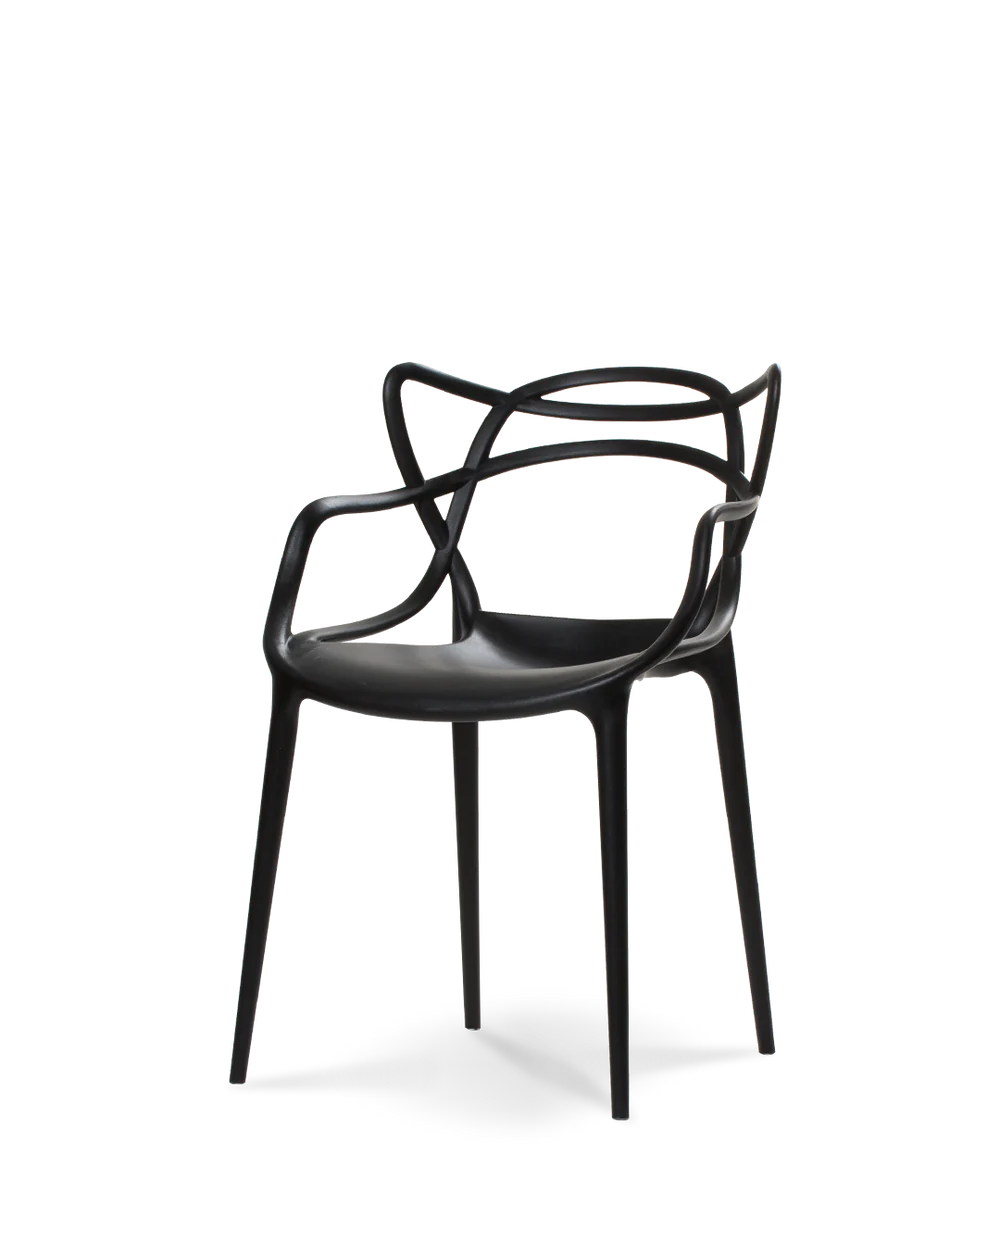 Design Chairs